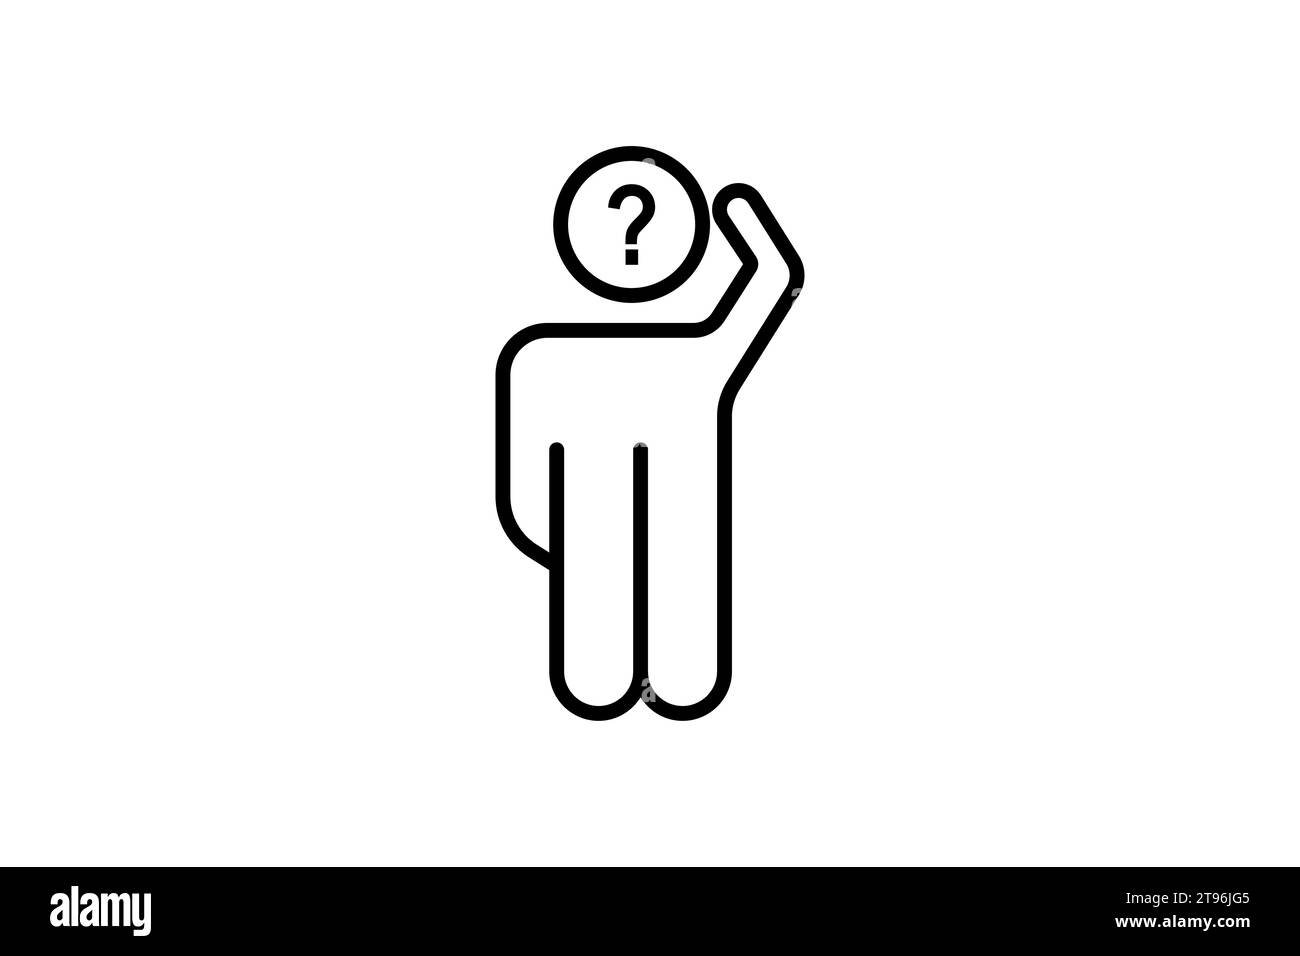 confused icon. human scratching head and question mark. icon related to confusion. line icon style. simple vector design editable Stock Vector